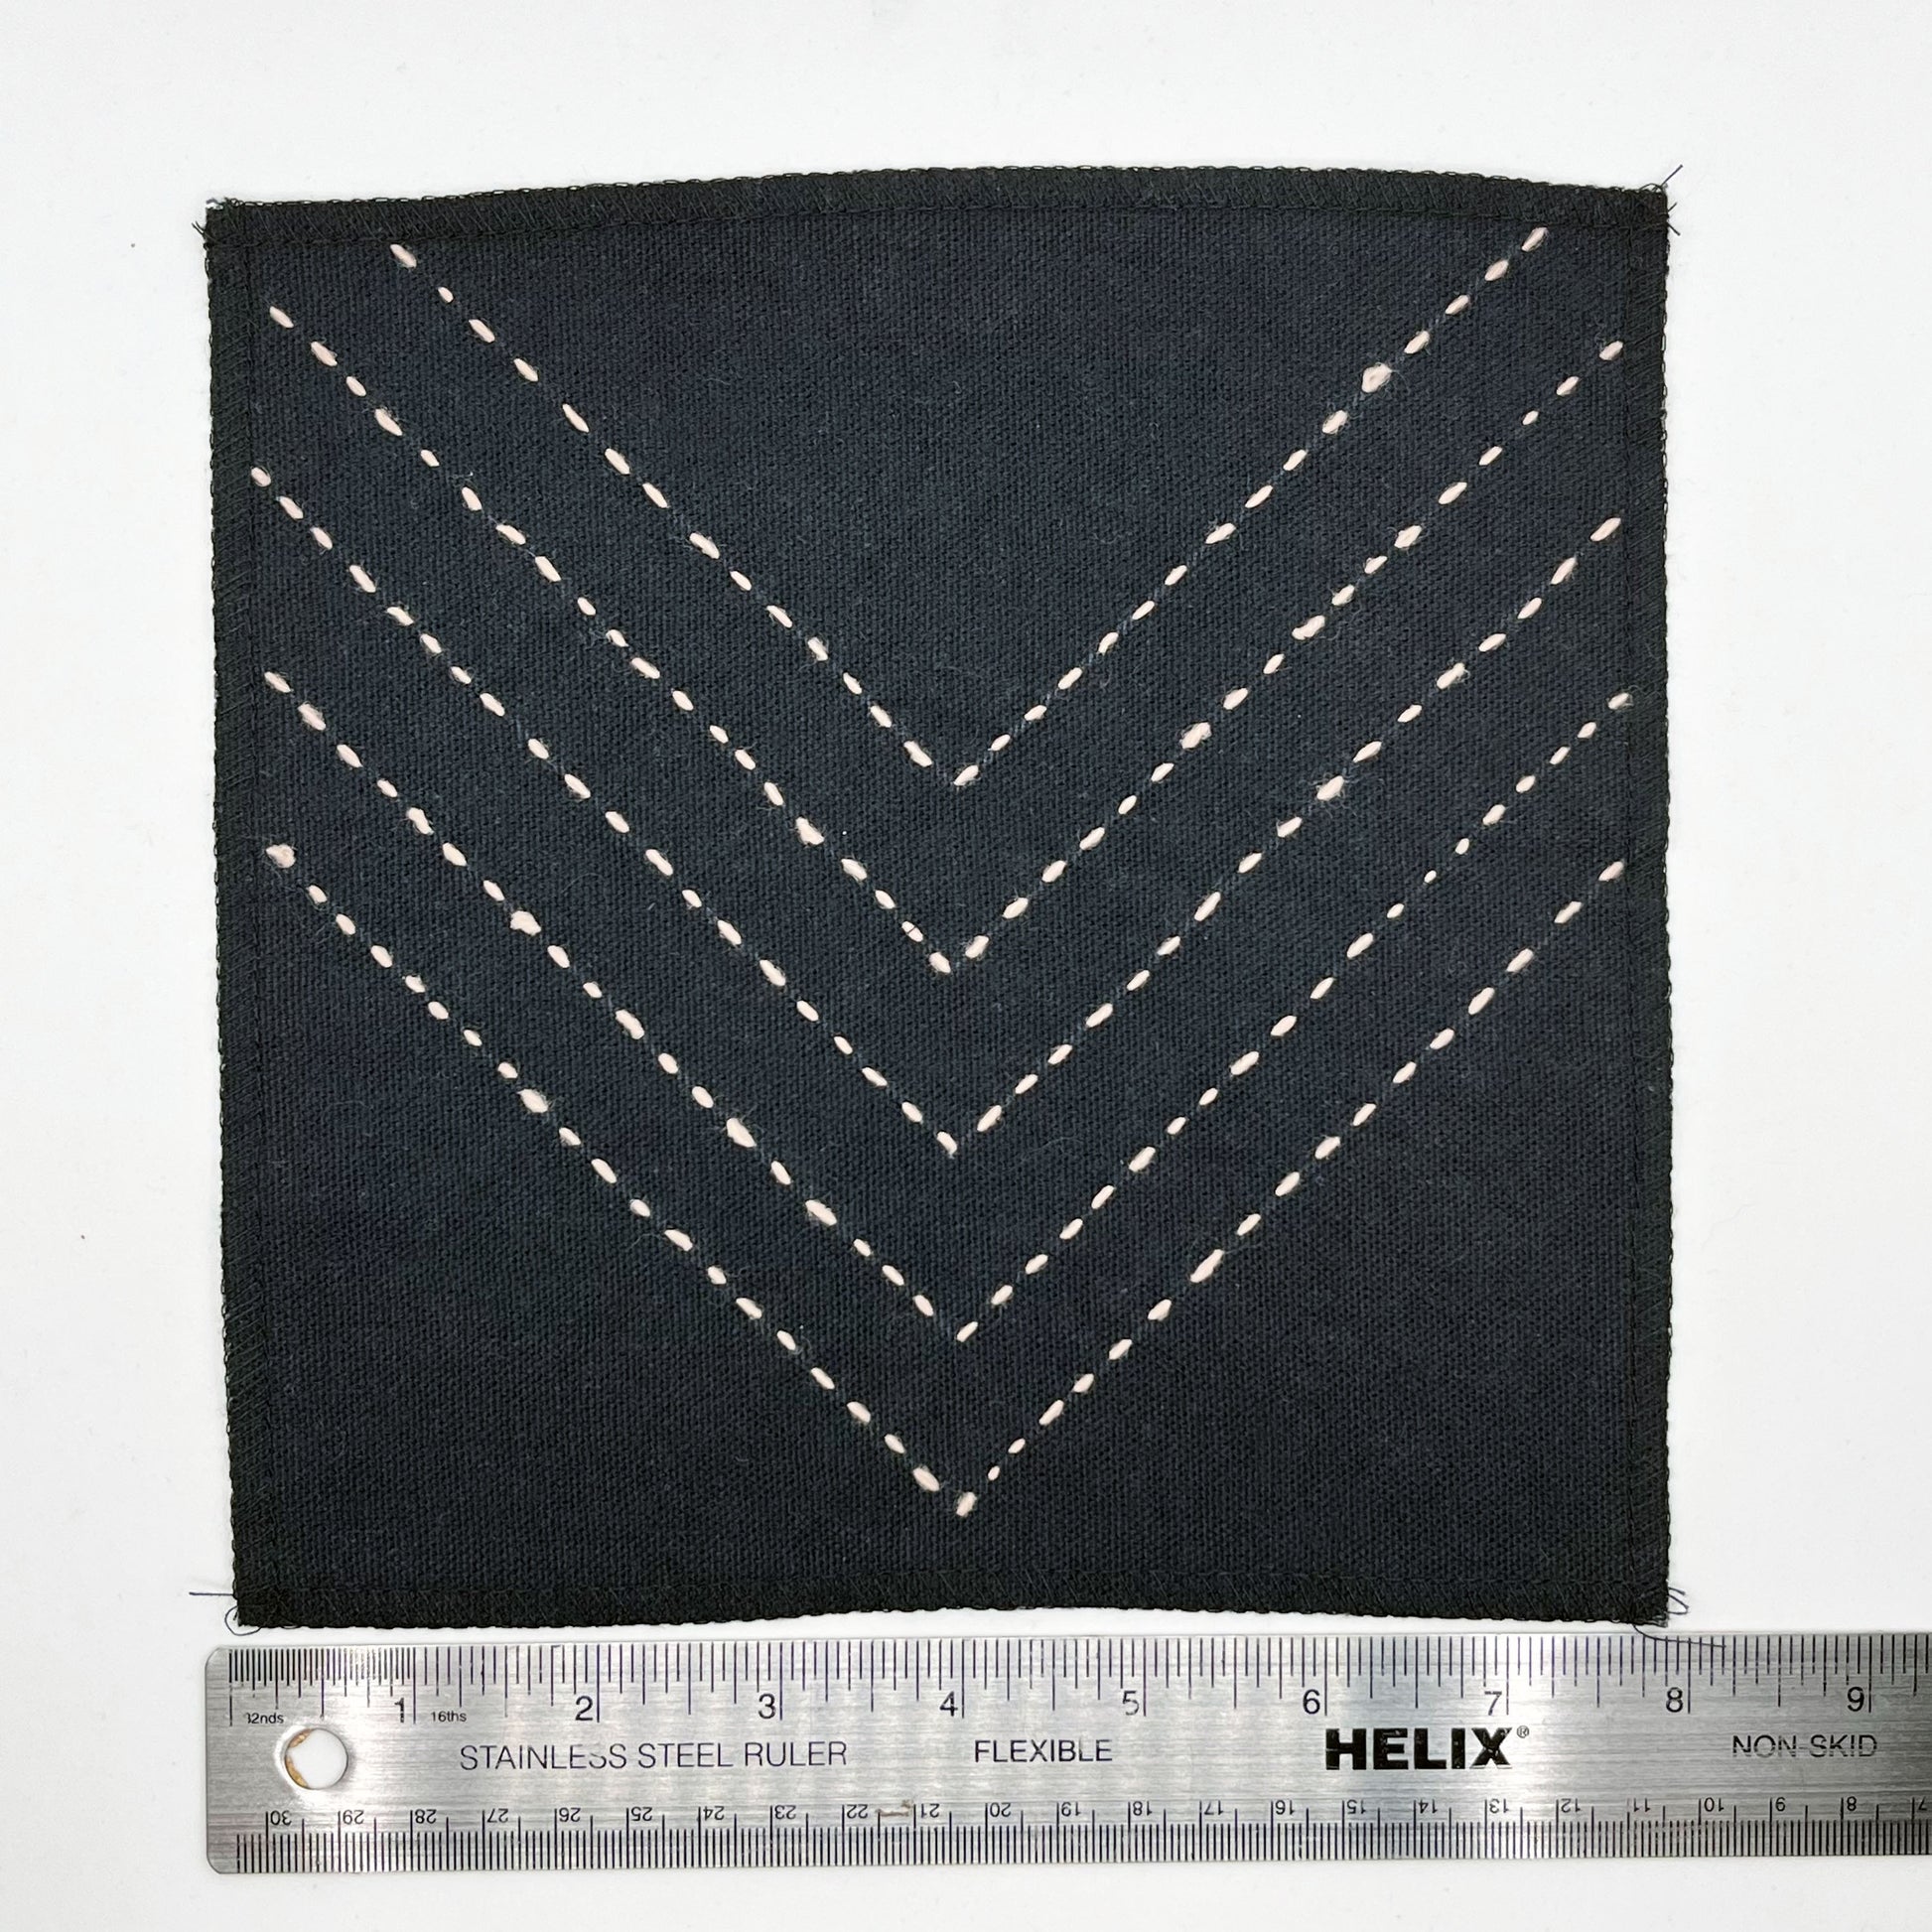 a square patch made out of black canvas, handstitched with rows of peach running stitches in a chevron pattern, with overlocked edges, next to a metal ruler to show a width of 8 inches, on a white background